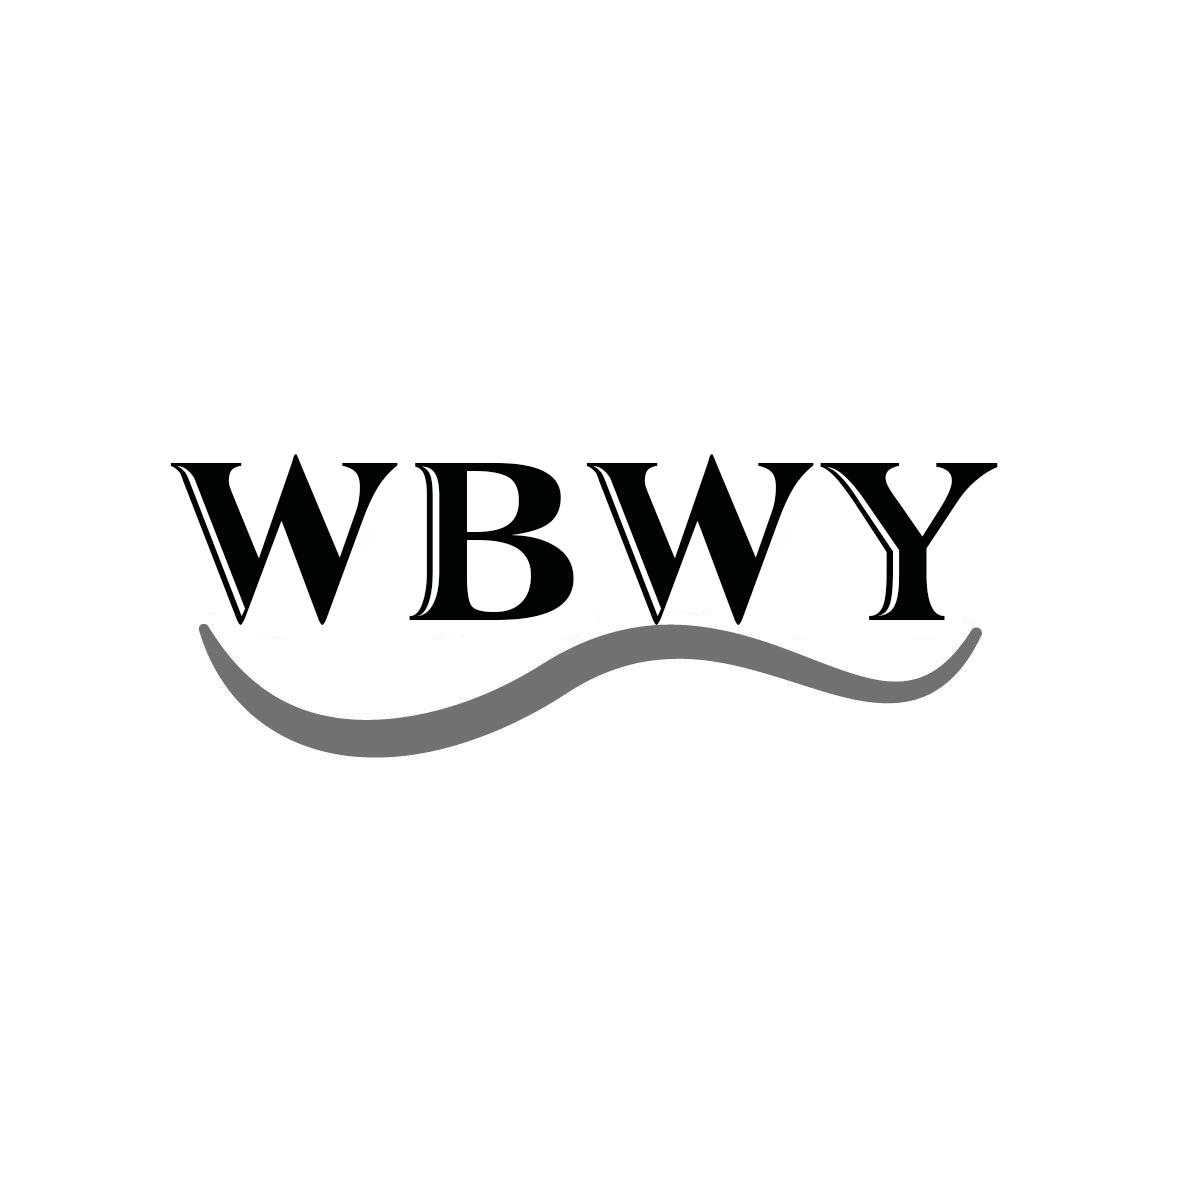 WBWY